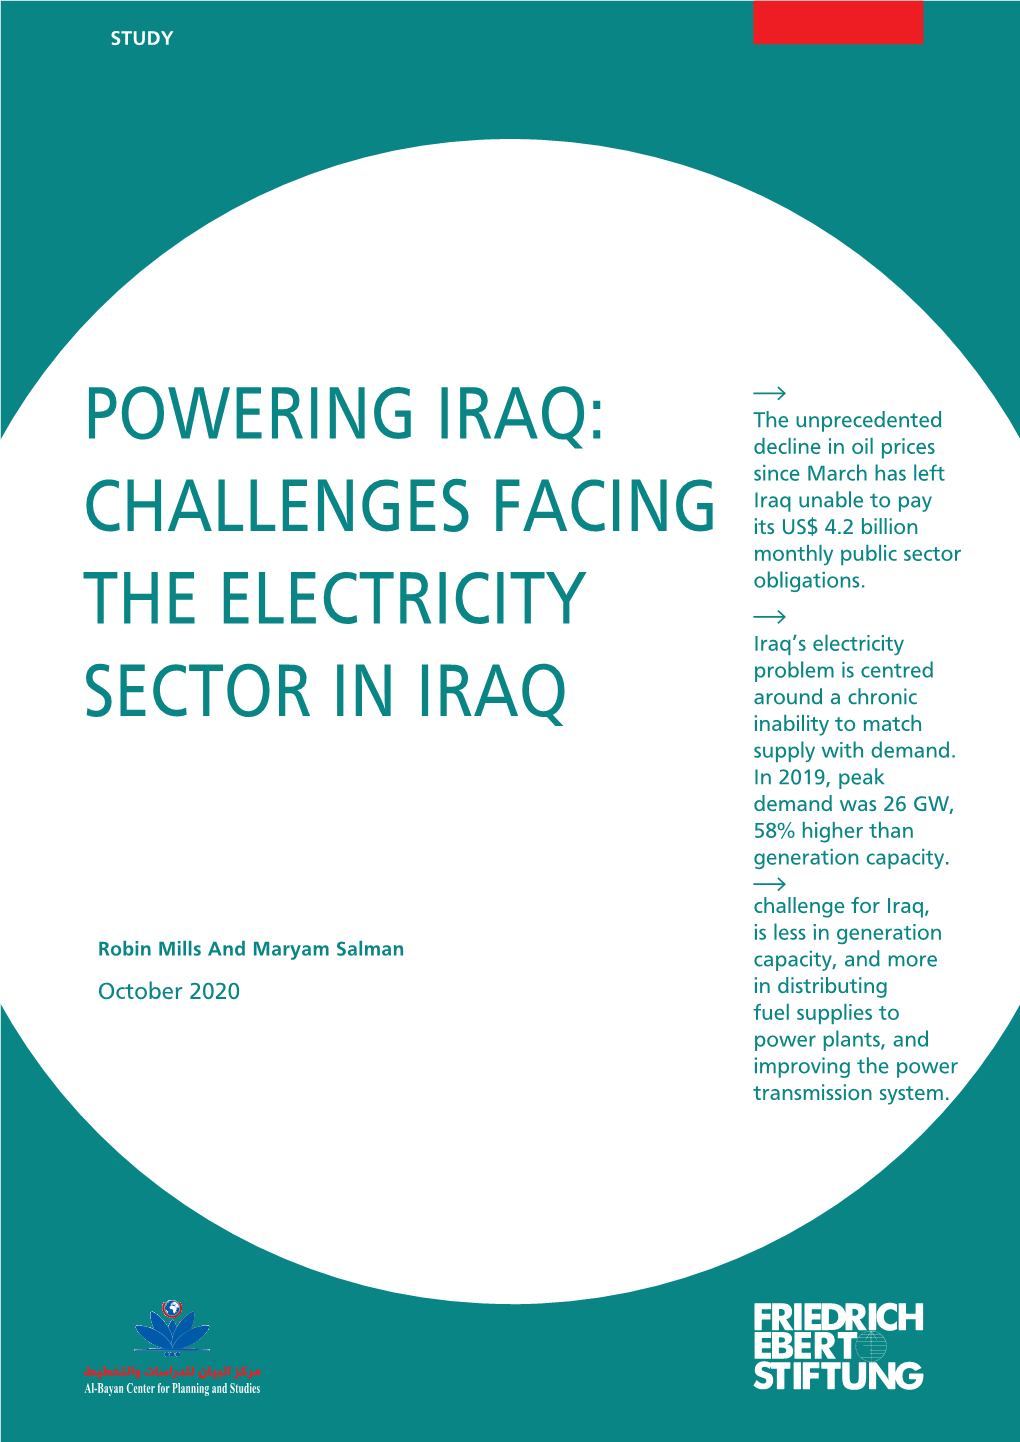 Challenges Facing the Electricity Sector in Iraq